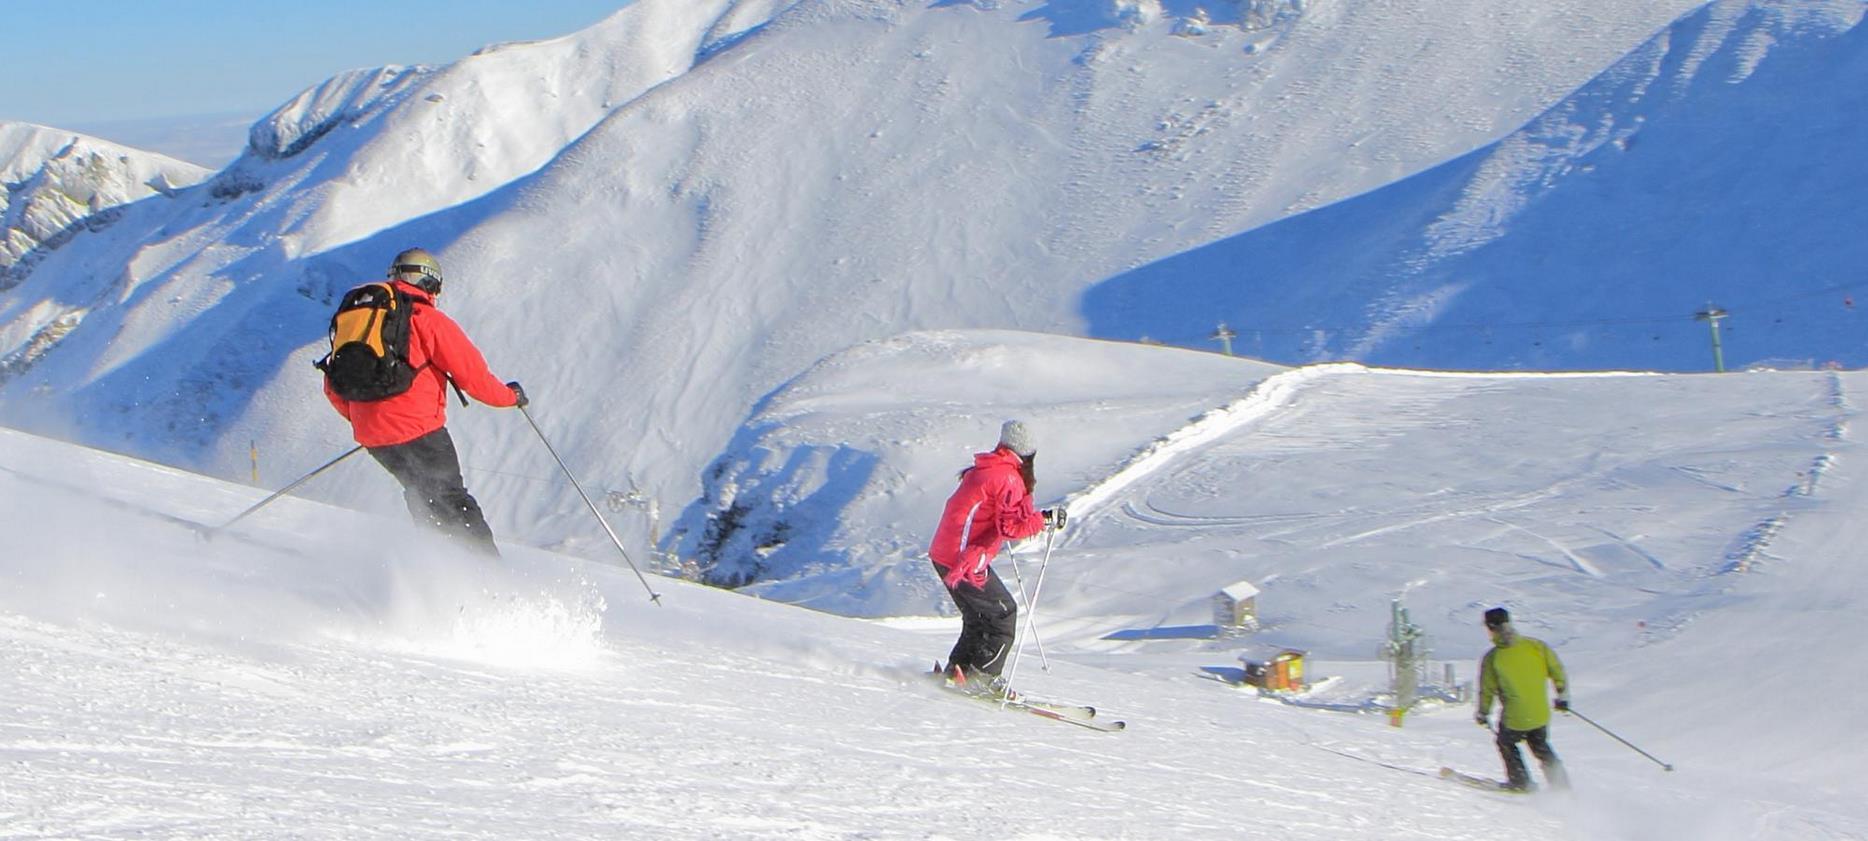 Super Besse - Skiers on the slopes of the Mont Dore resort